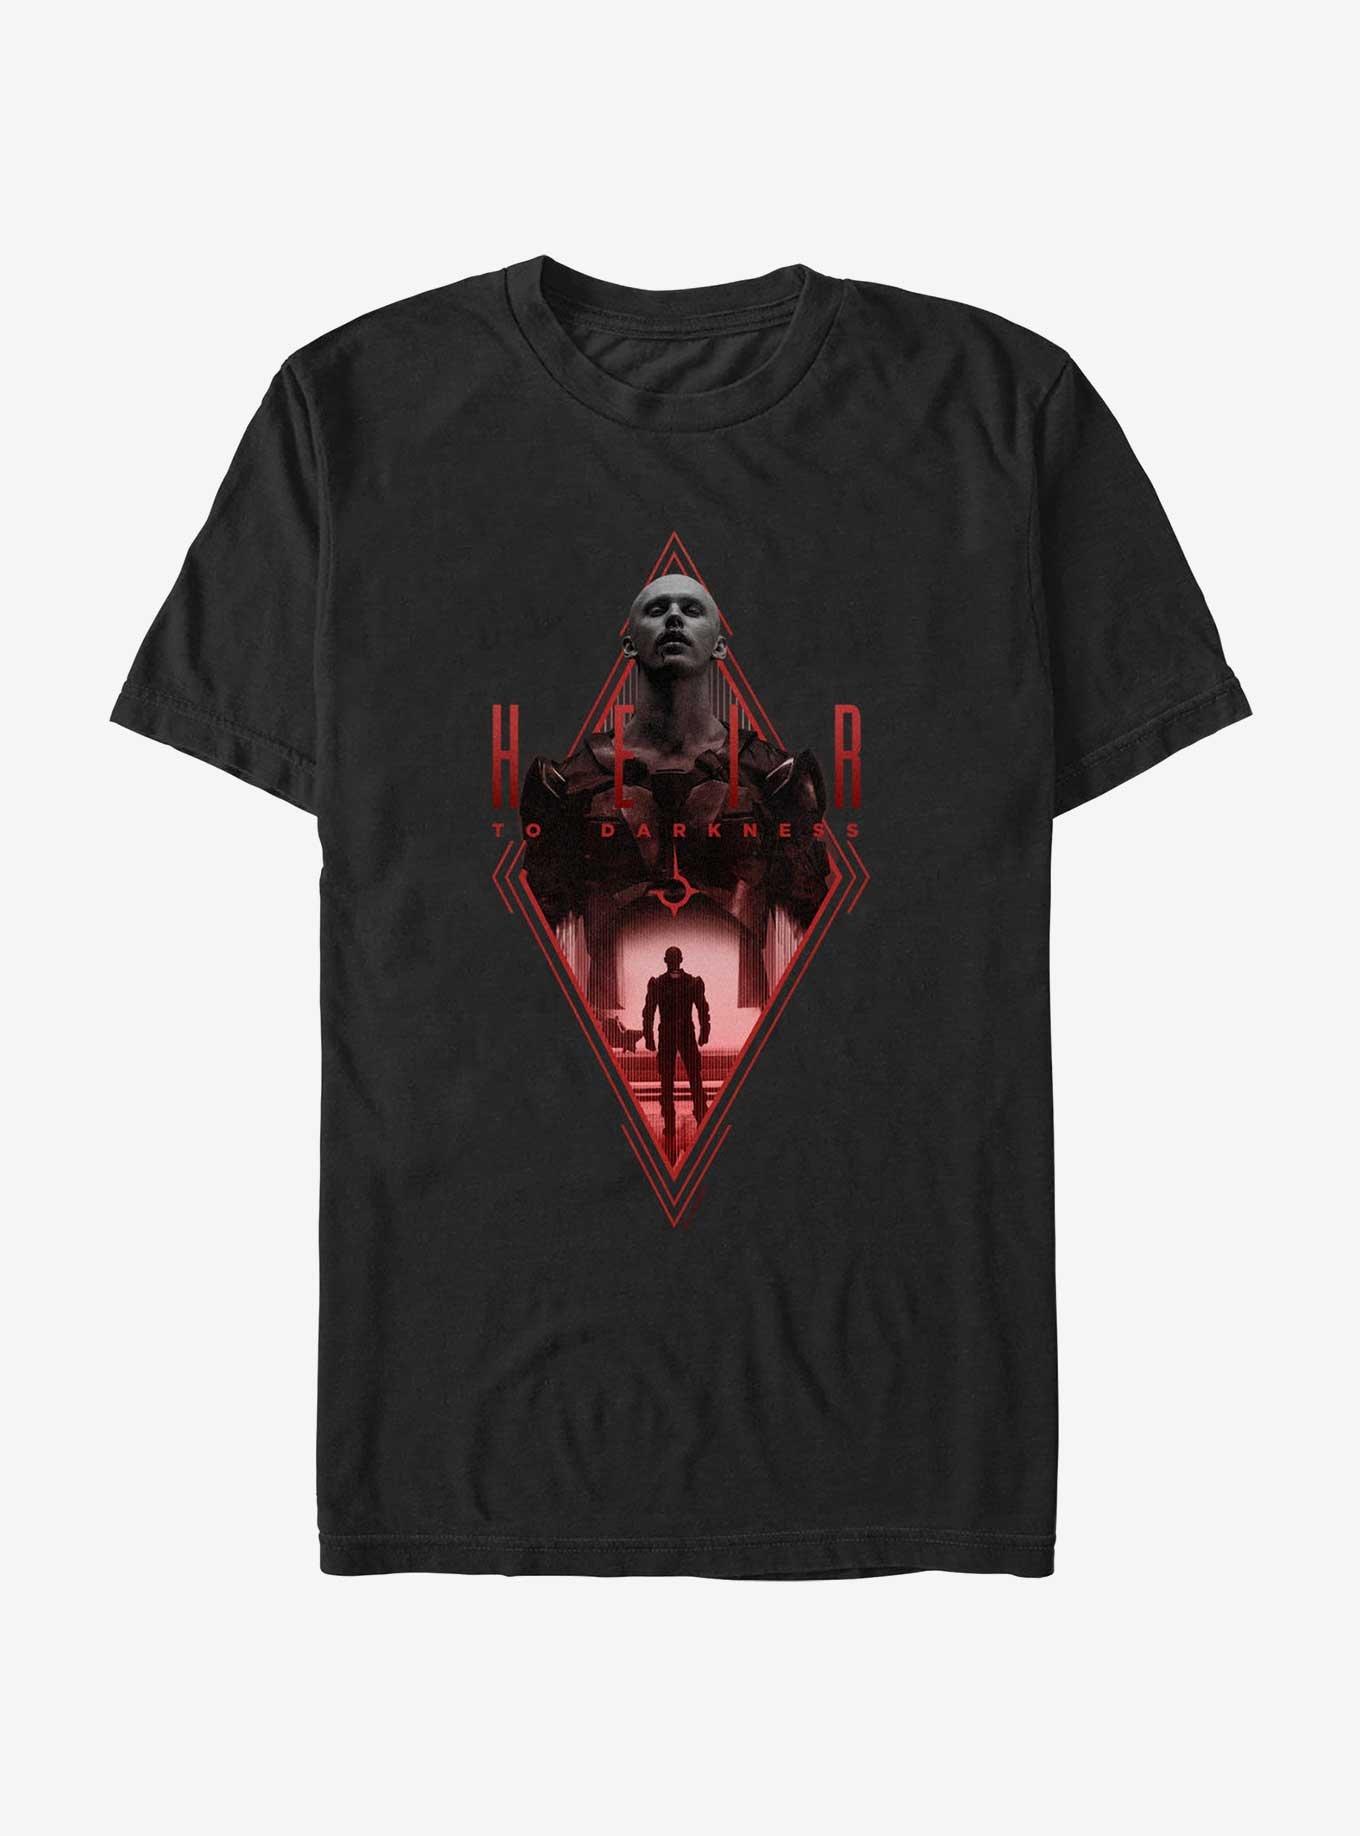 Dune: Part Two Heir To Darkness T-Shirt, BLACK, hi-res